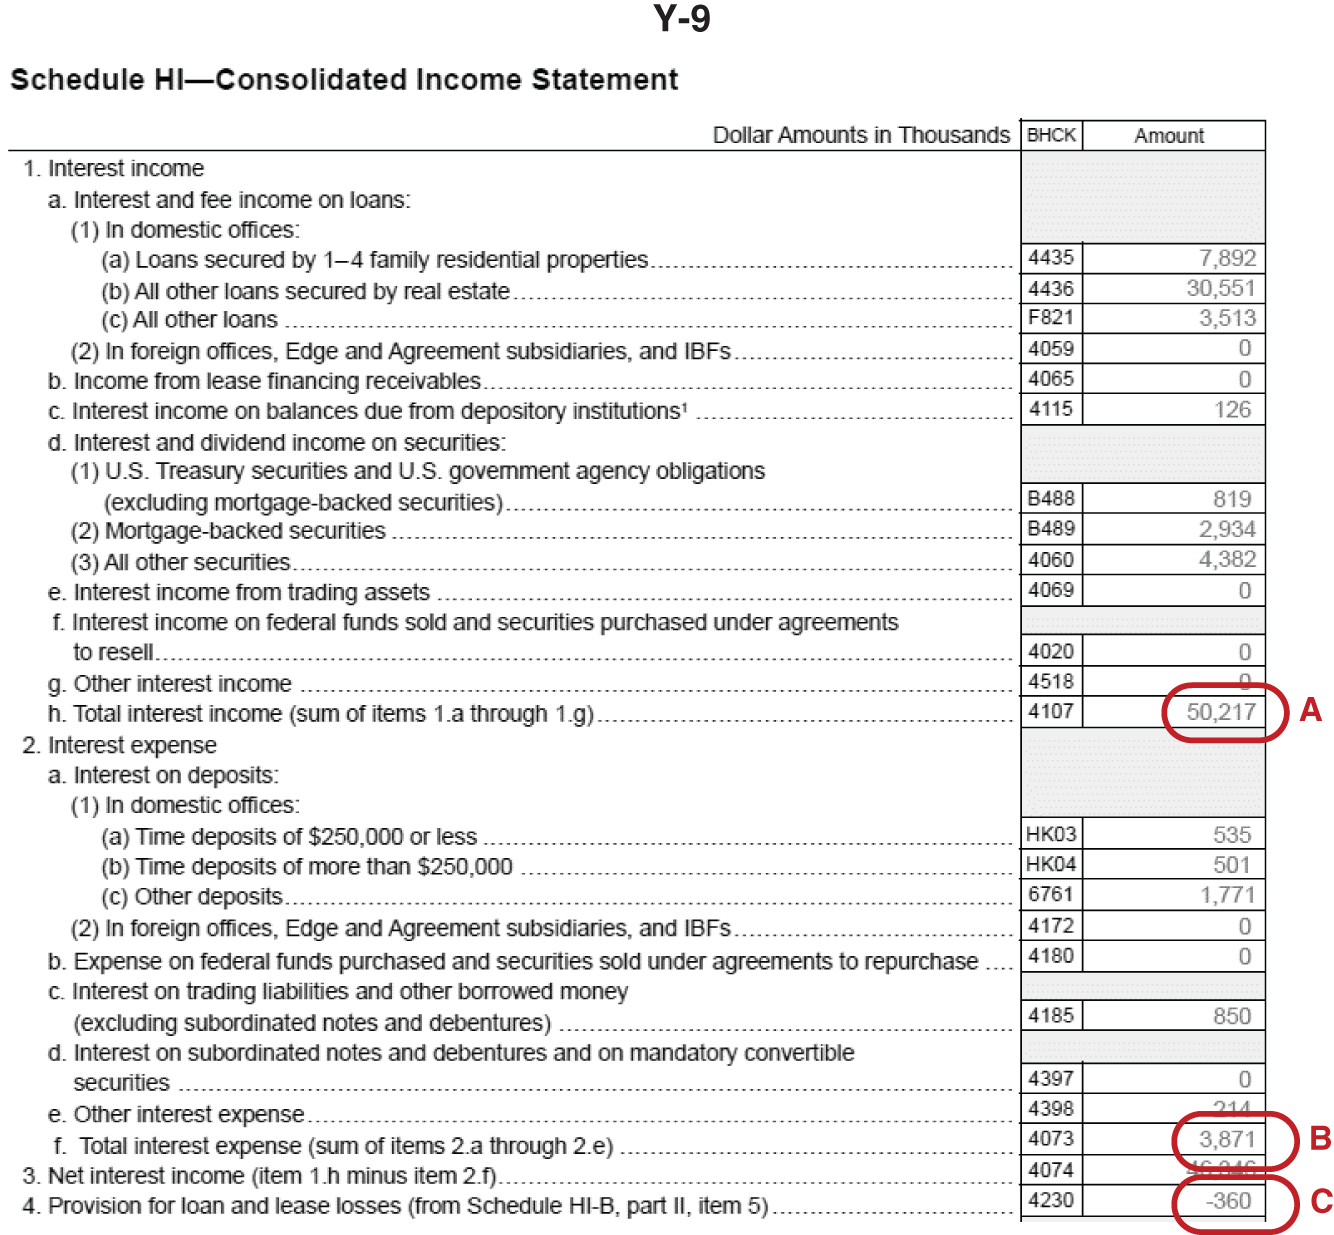 An illustration of the Income Statement – A.